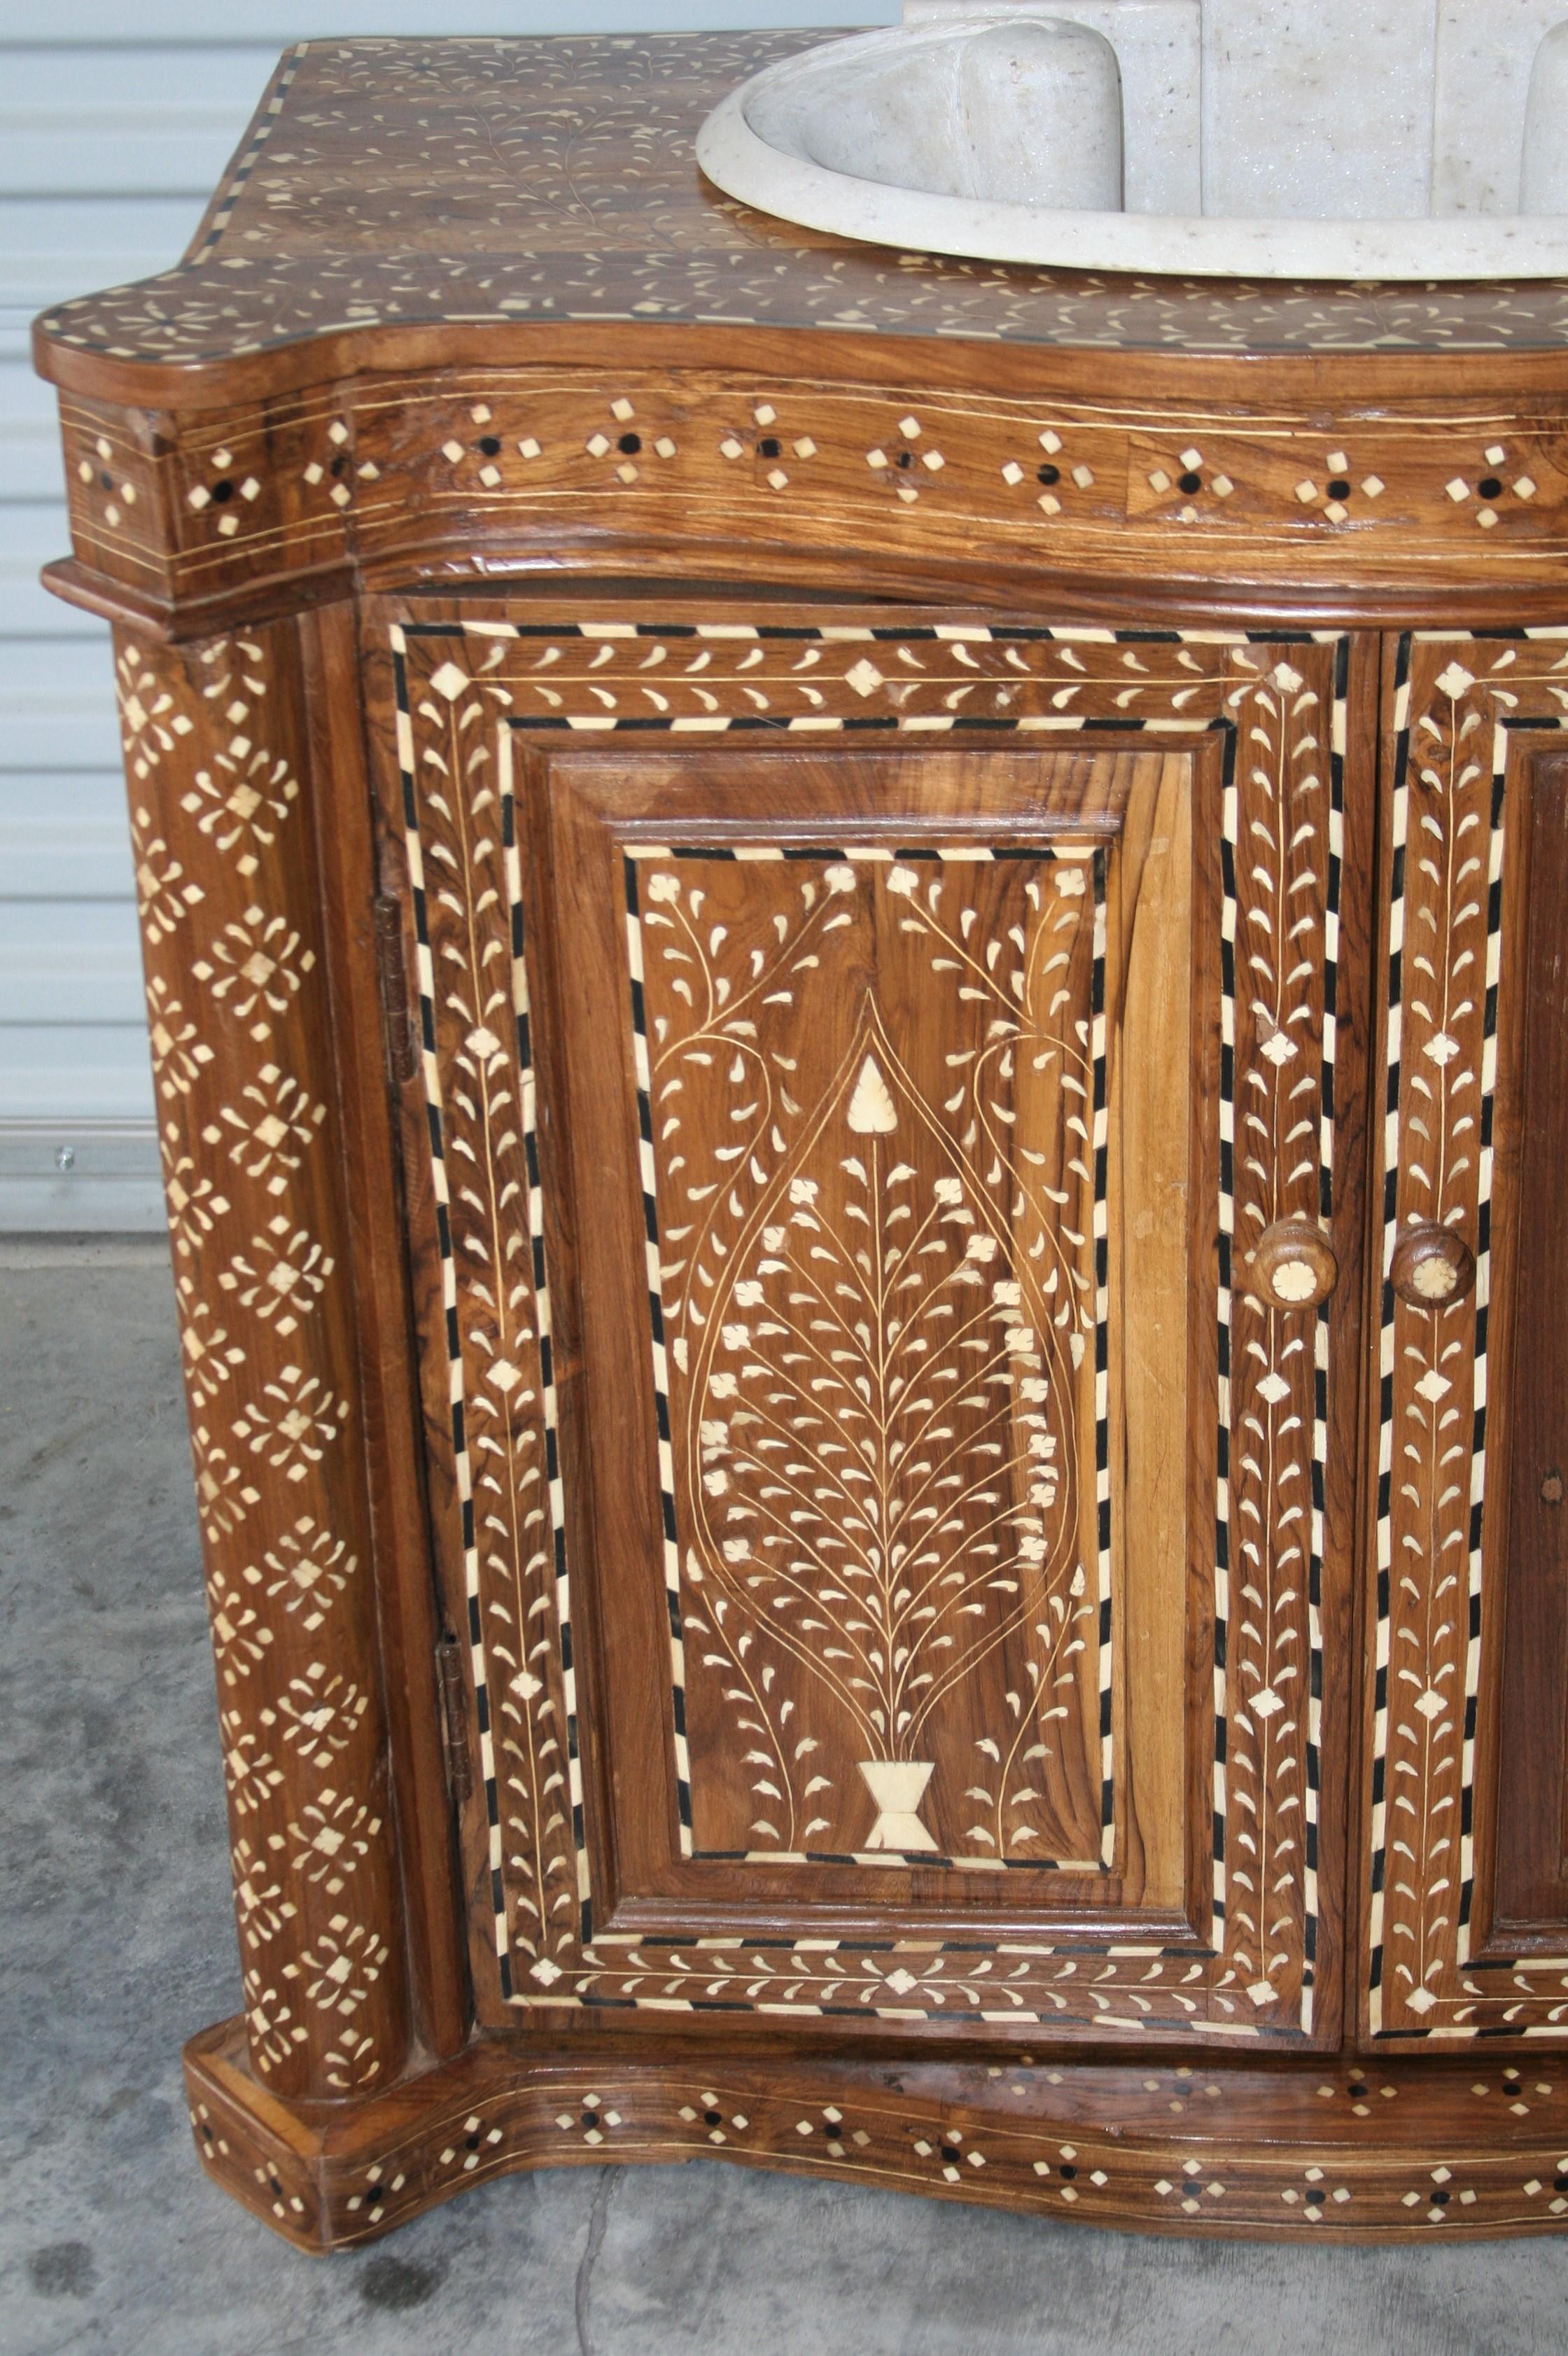 Anglo Raj Fine Marble Sink on Solid Teak Wood Vanity Exquisitely Hand Inlaid with Bone For Sale